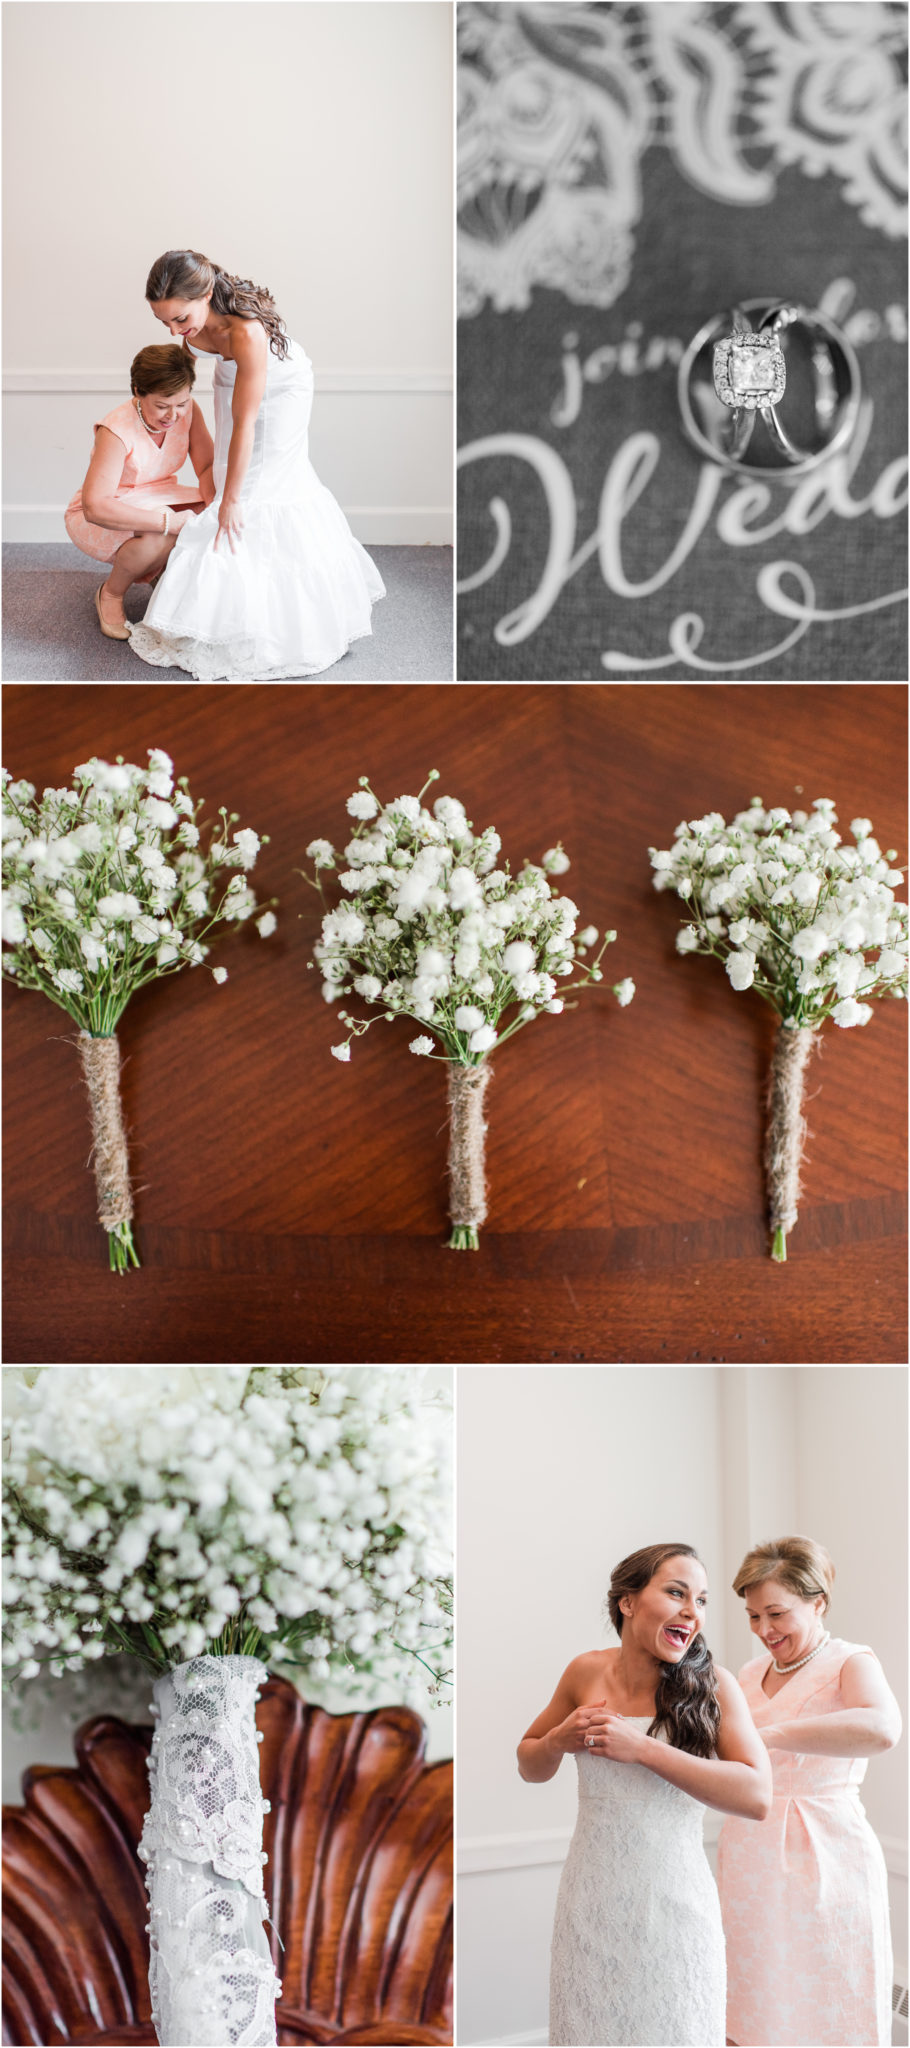 Mint, Burlap and baby's breathe wedding details.